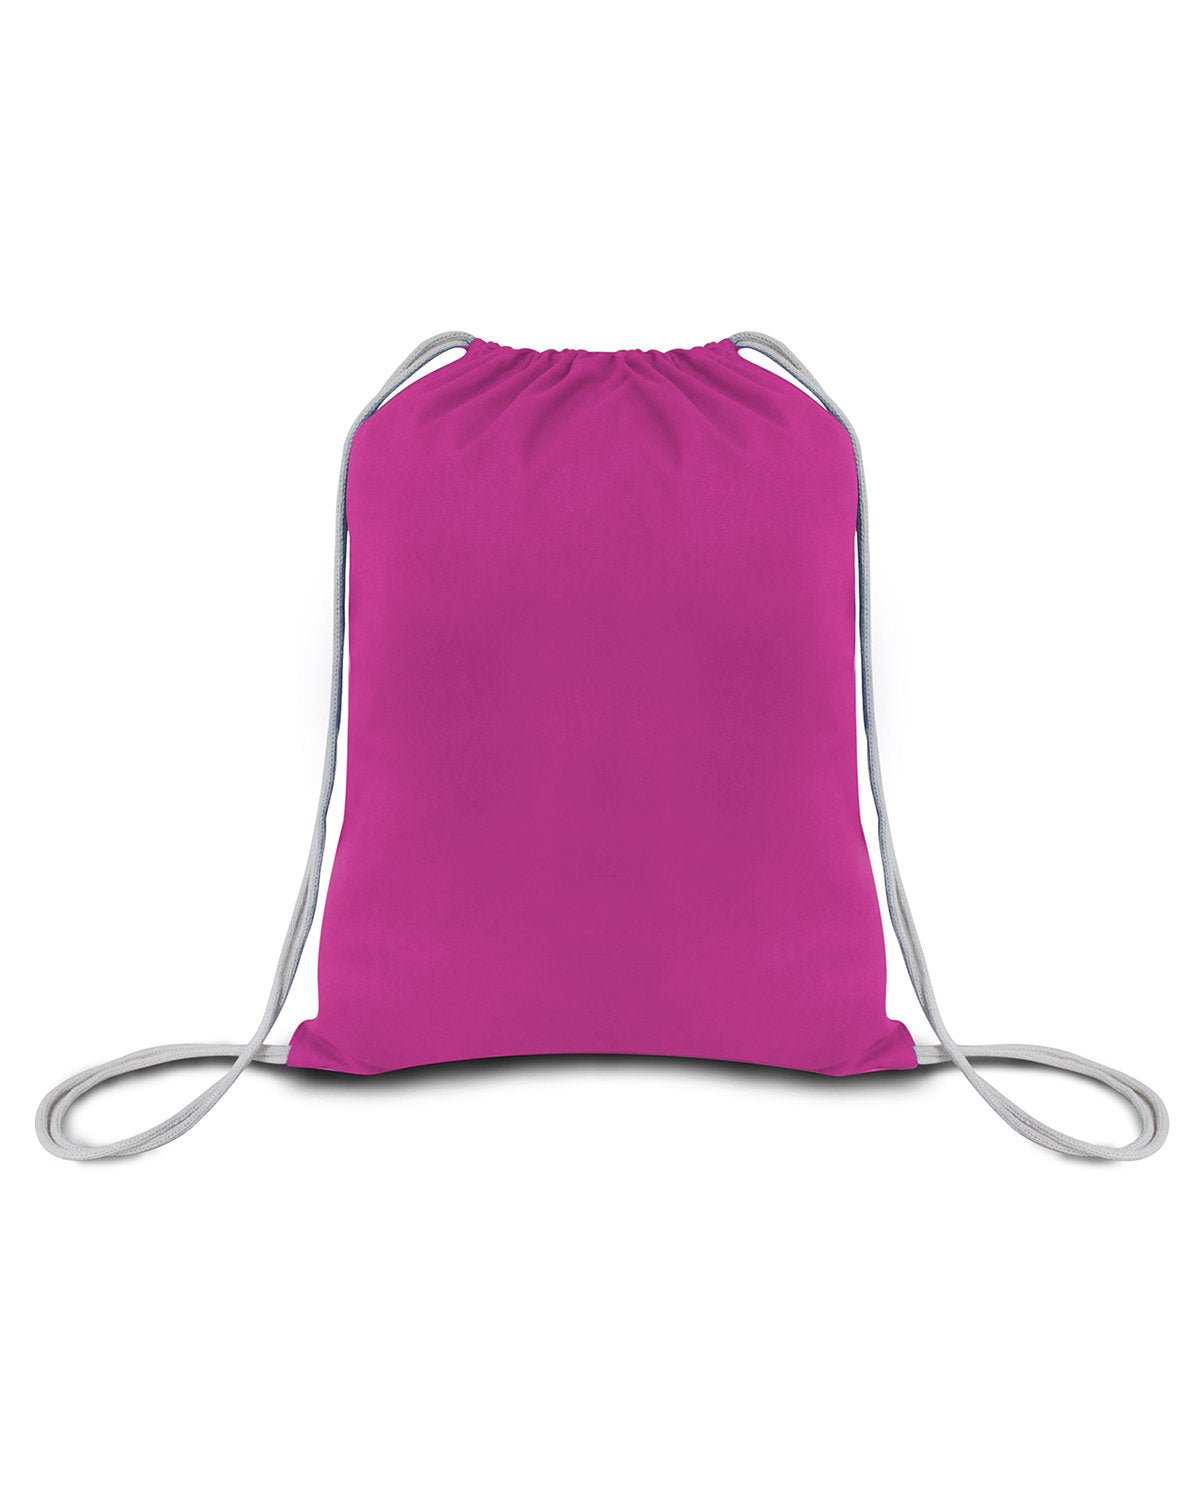 OAD101-OAD-HOT PINK-OAD-Bags and Accessories-1